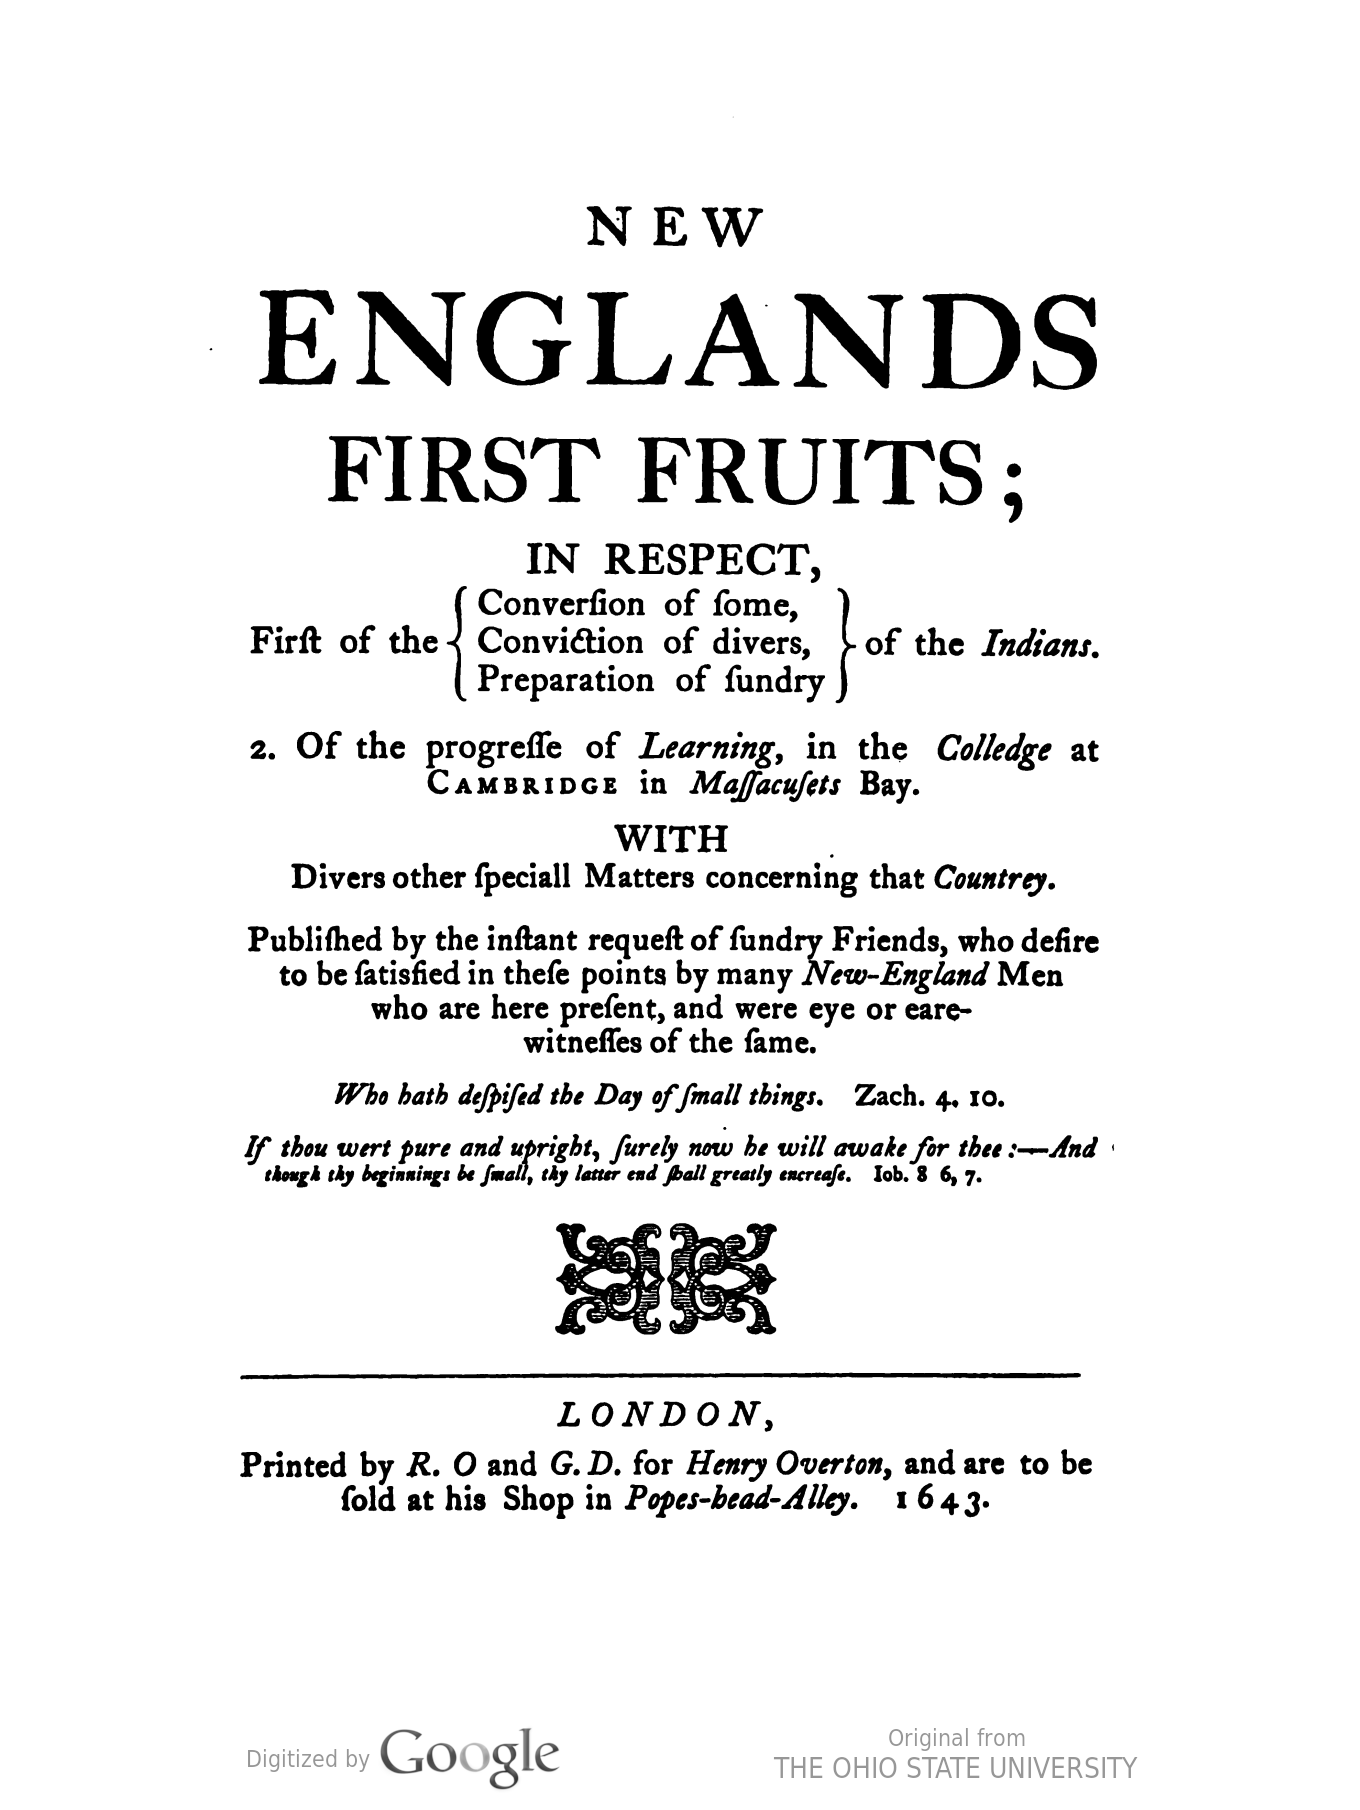 New England’s First Fruits, Book